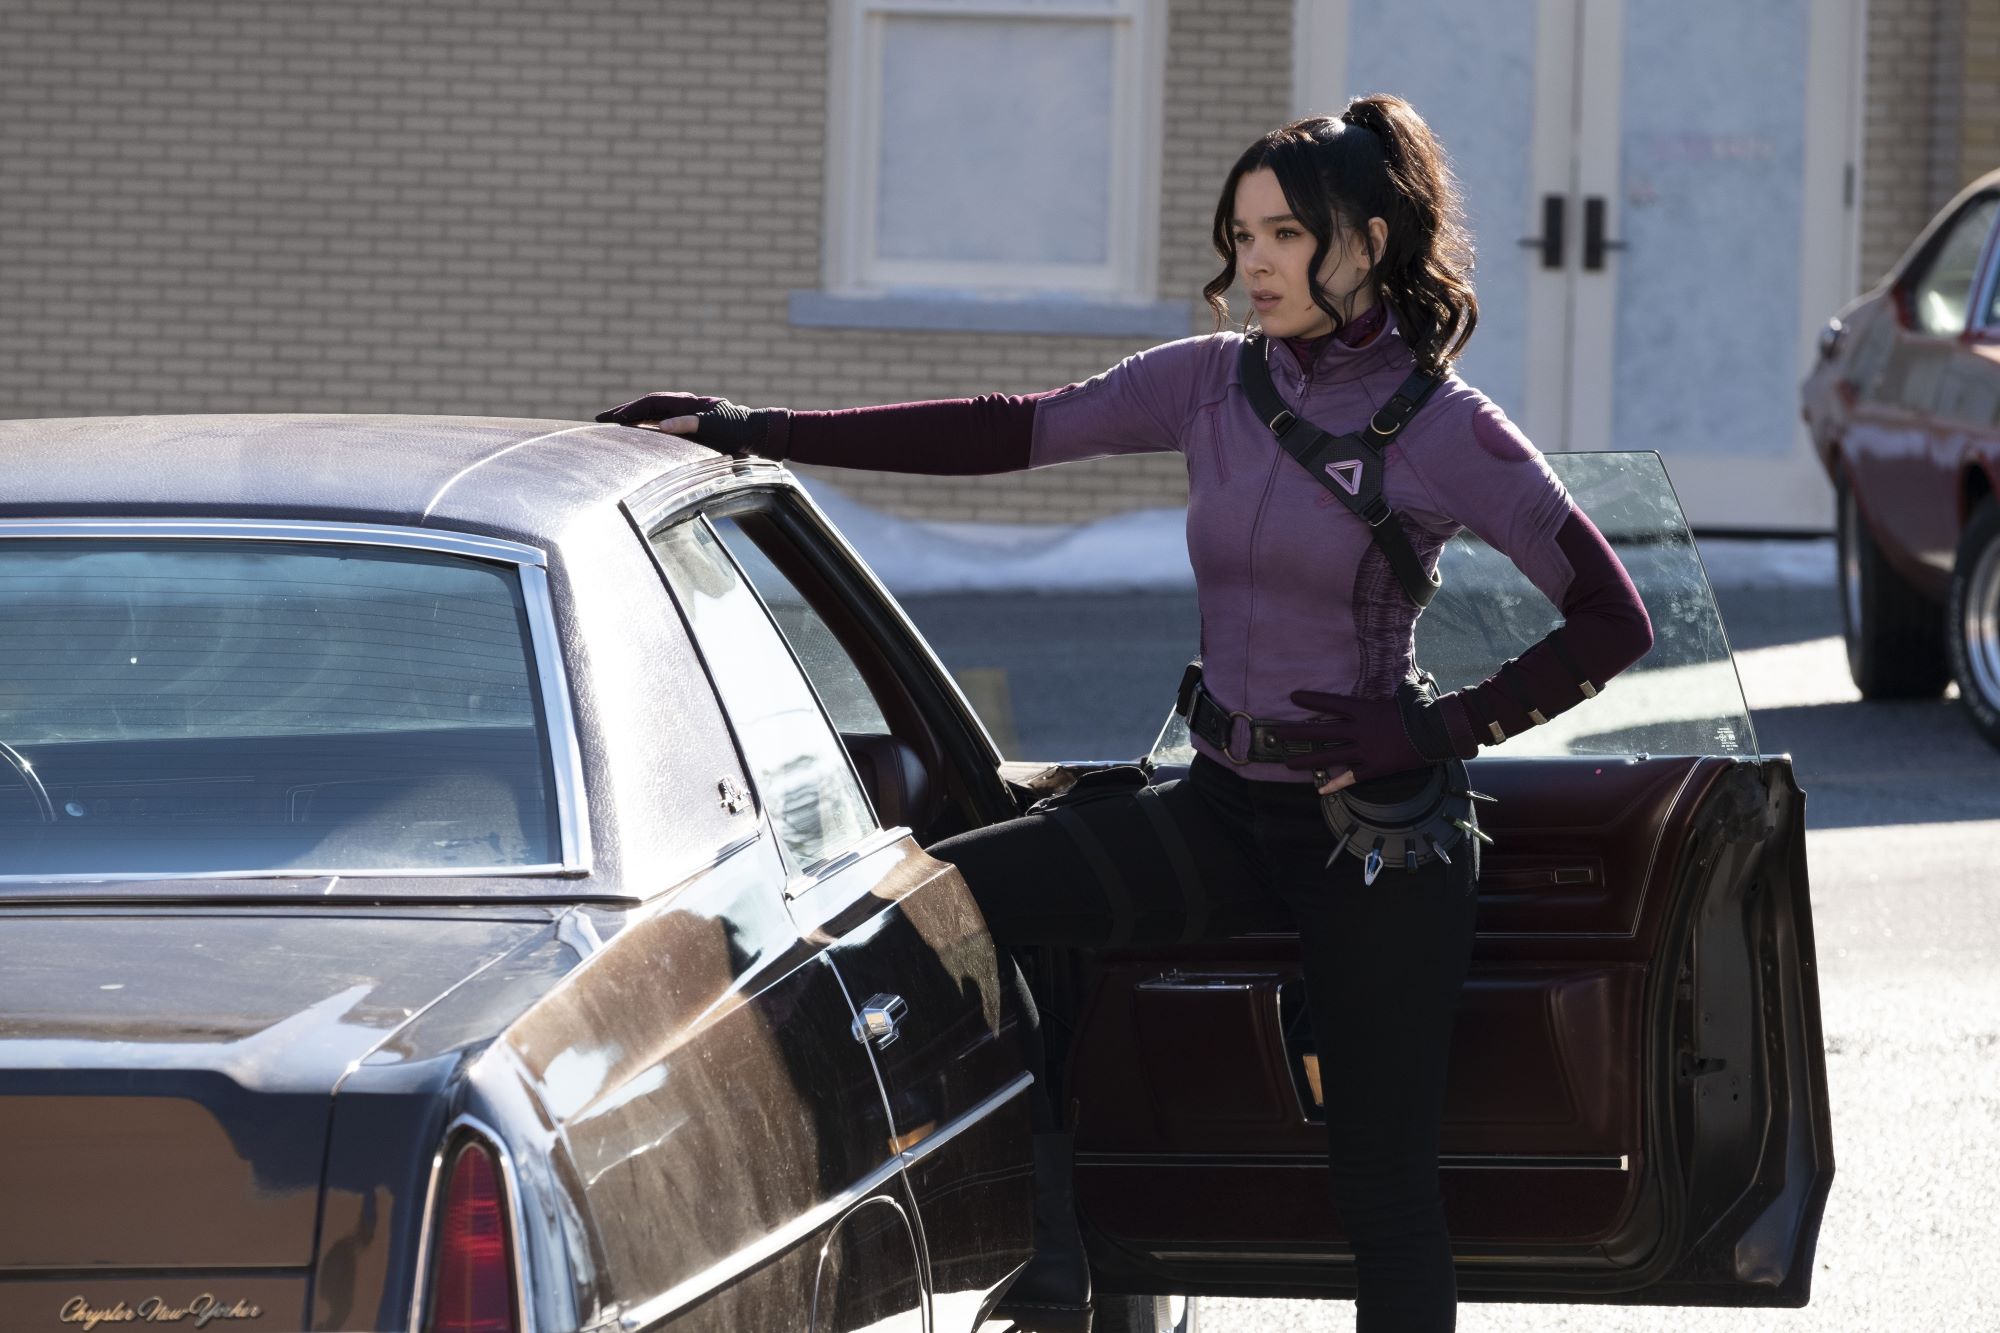 'Hawkeye' Episode 4 star Hailee Steinfeld as Kate Bishop, who found a mysterious rolex watch in episode 4,